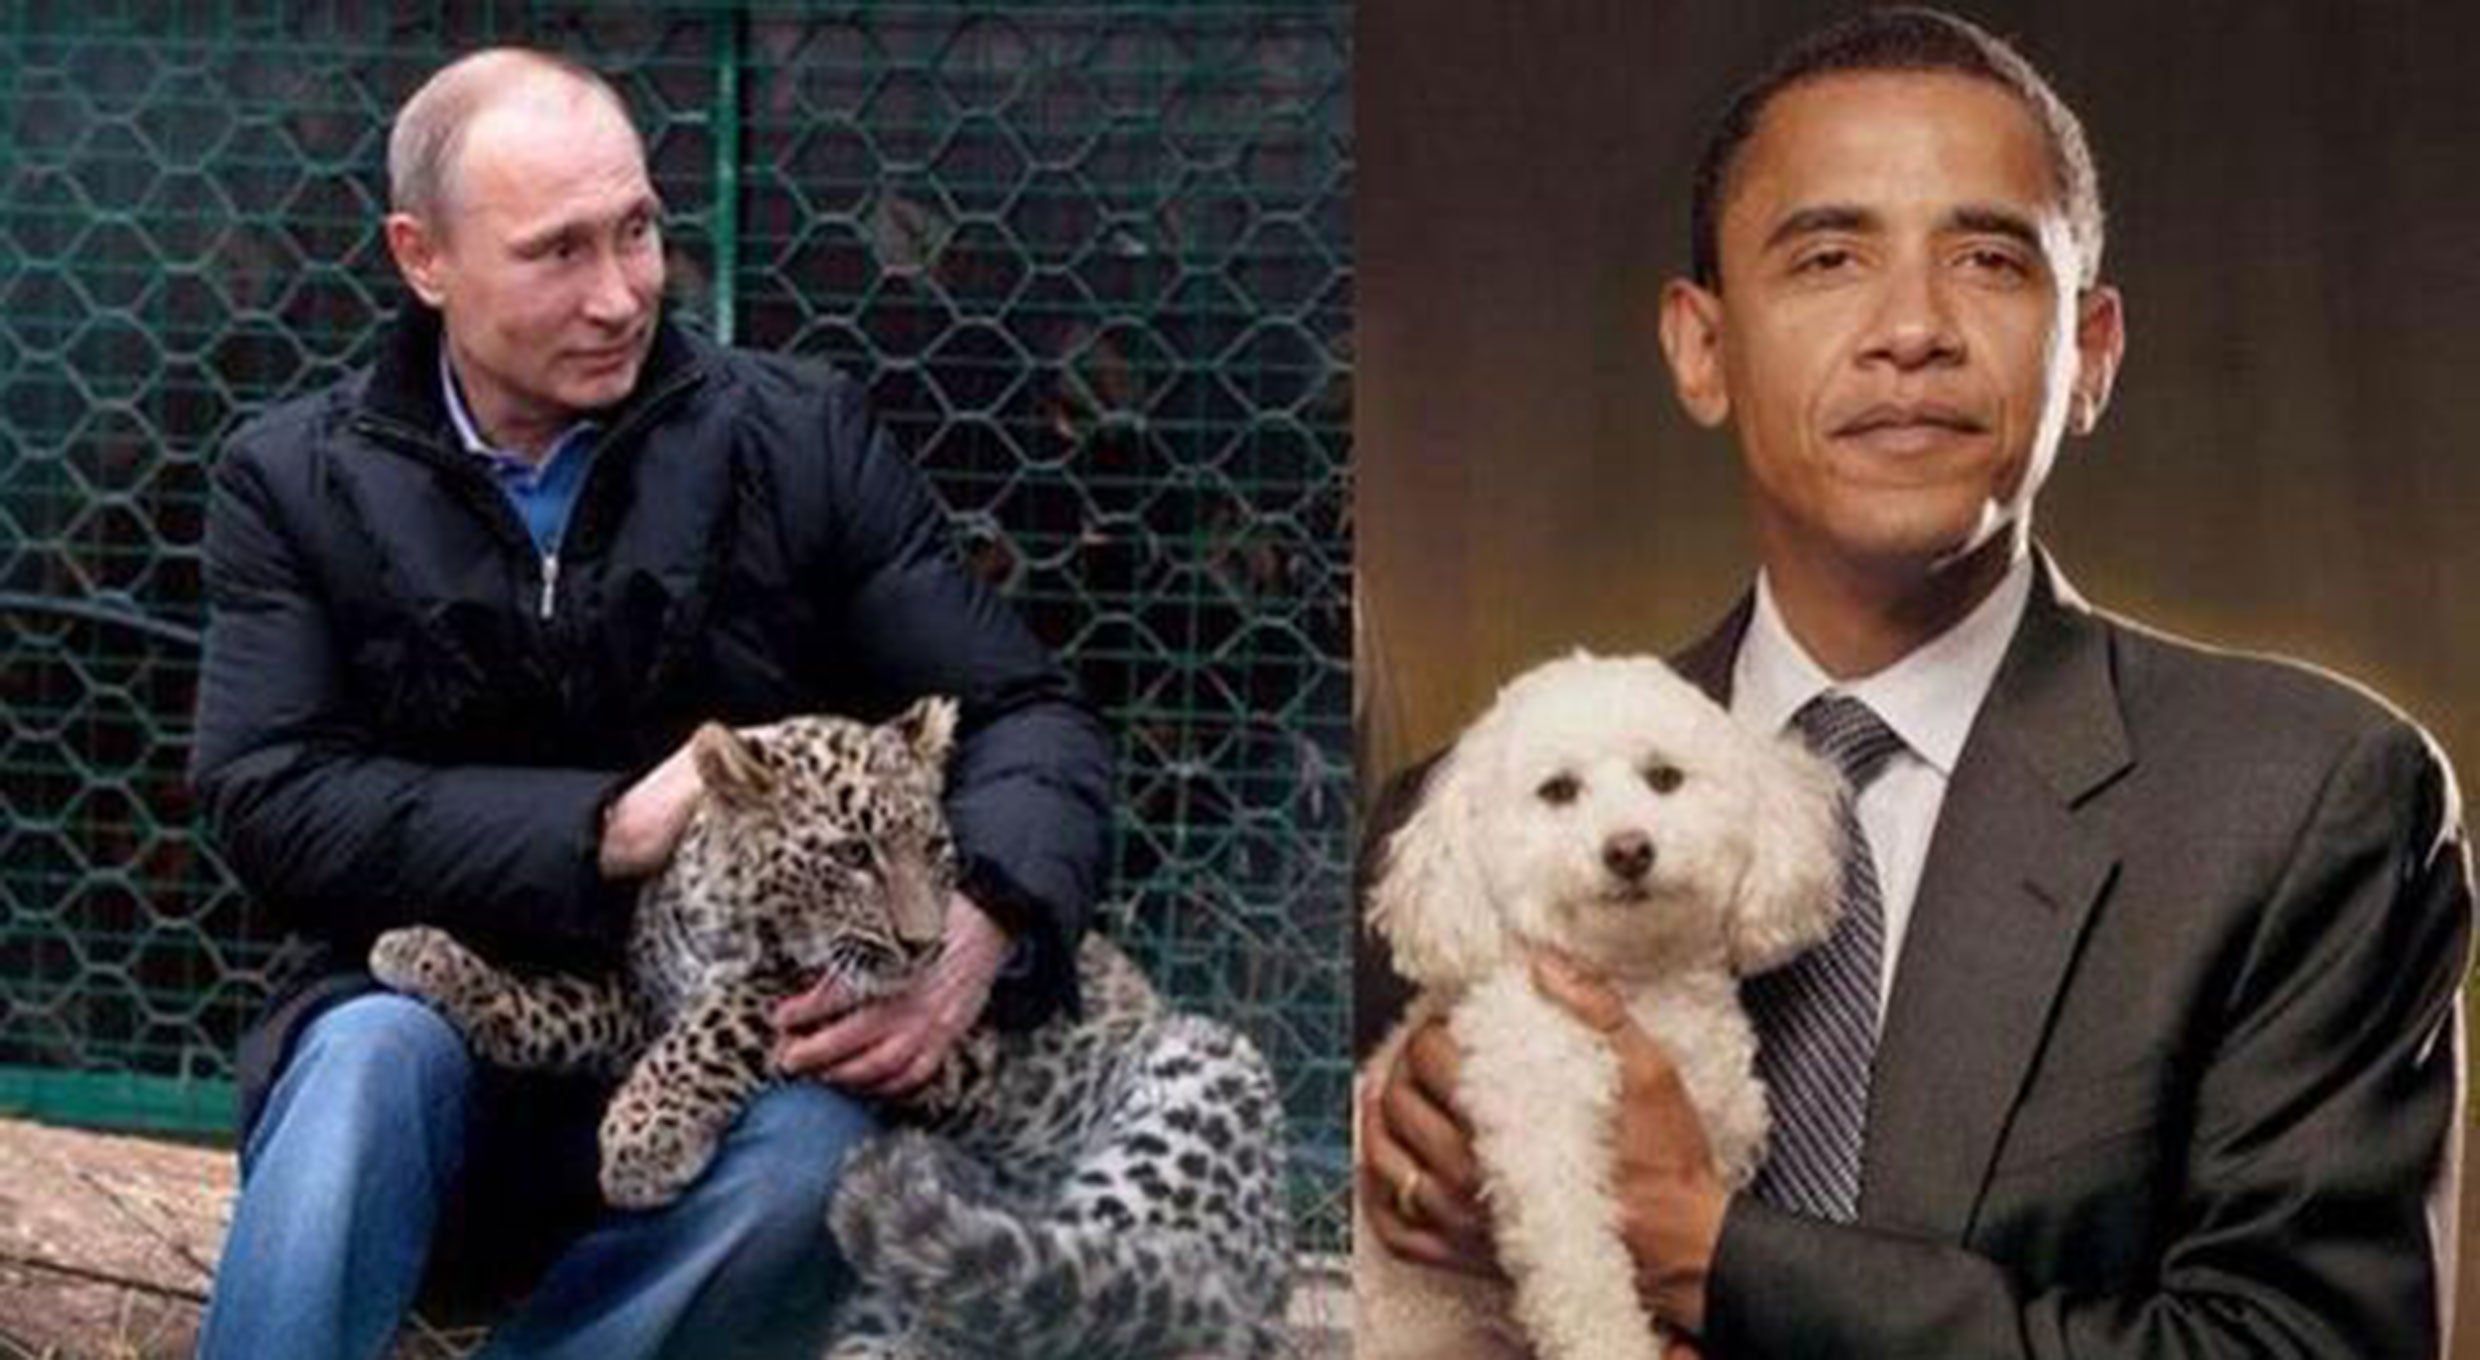 An image tweeted by the Russian deputy prime minister comparing the masculinity of Vladimir Putin, petting a leopard, and Barack Obama, holding a fluffy poodle